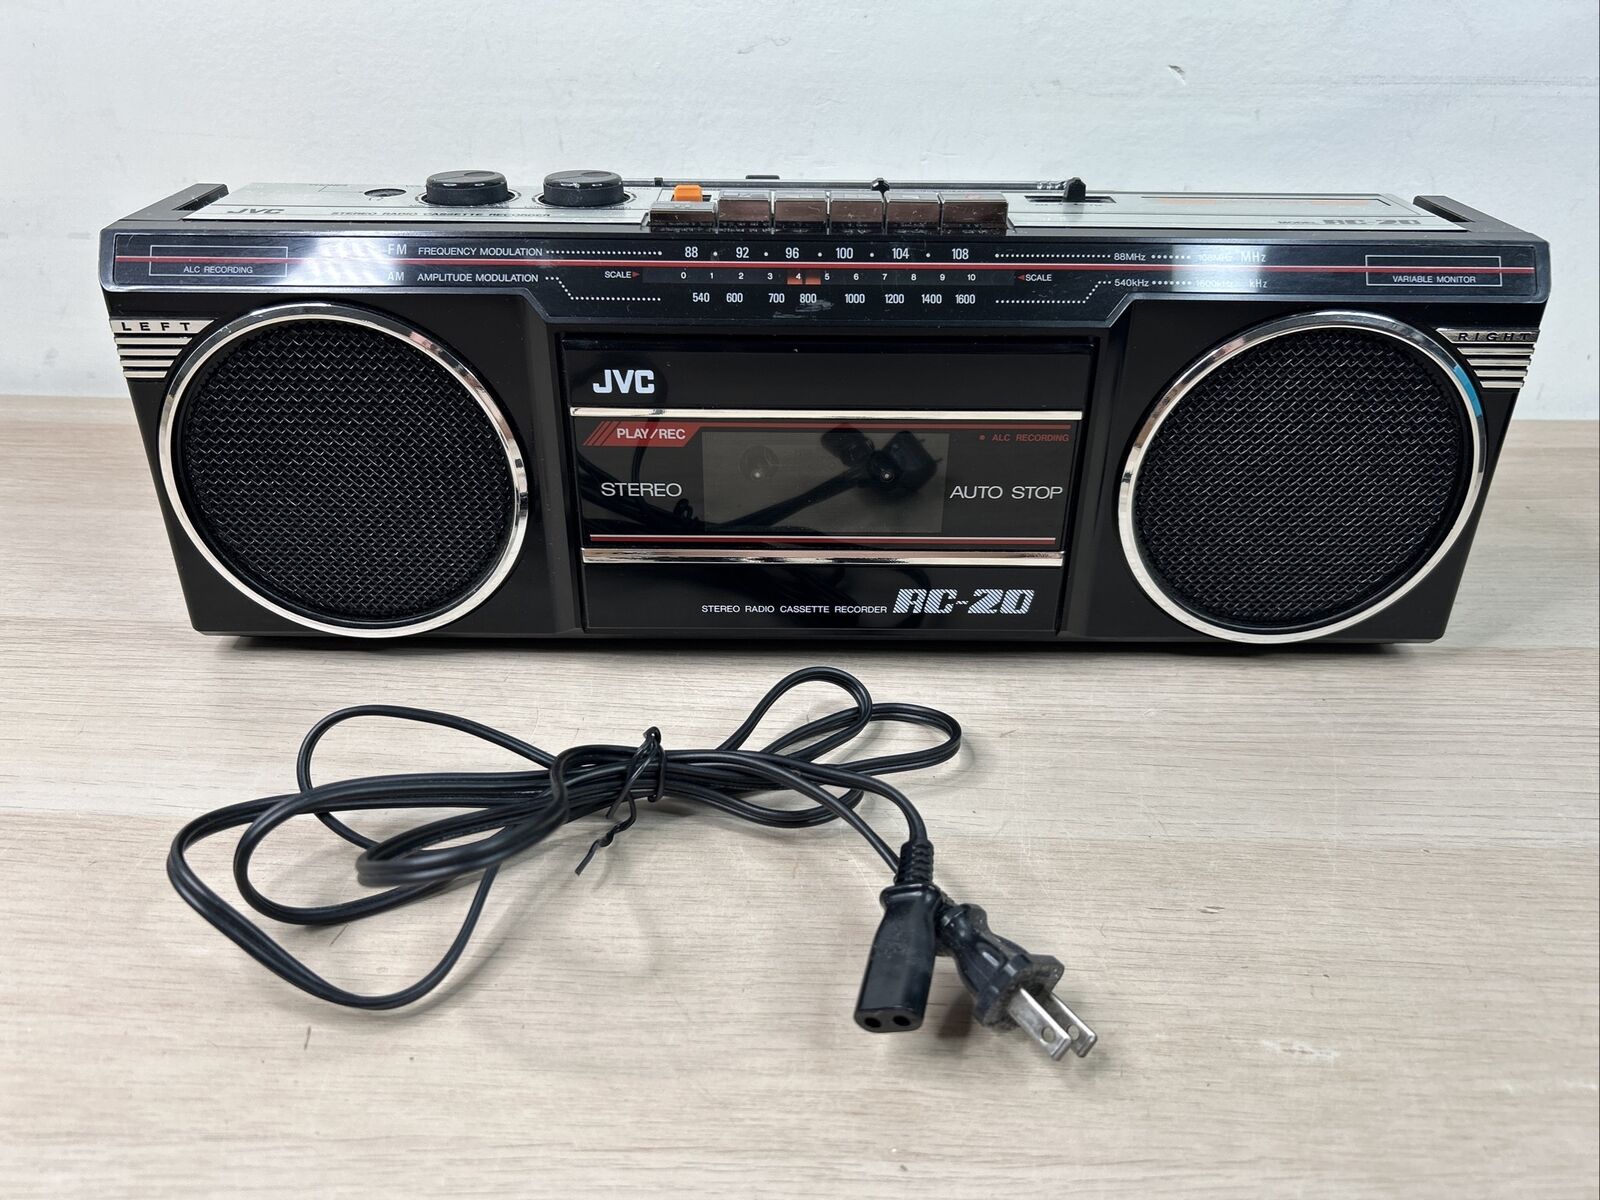 JVC RC-20J 1980s Stereo Cassette Recorder Boombox. Excellent Condition